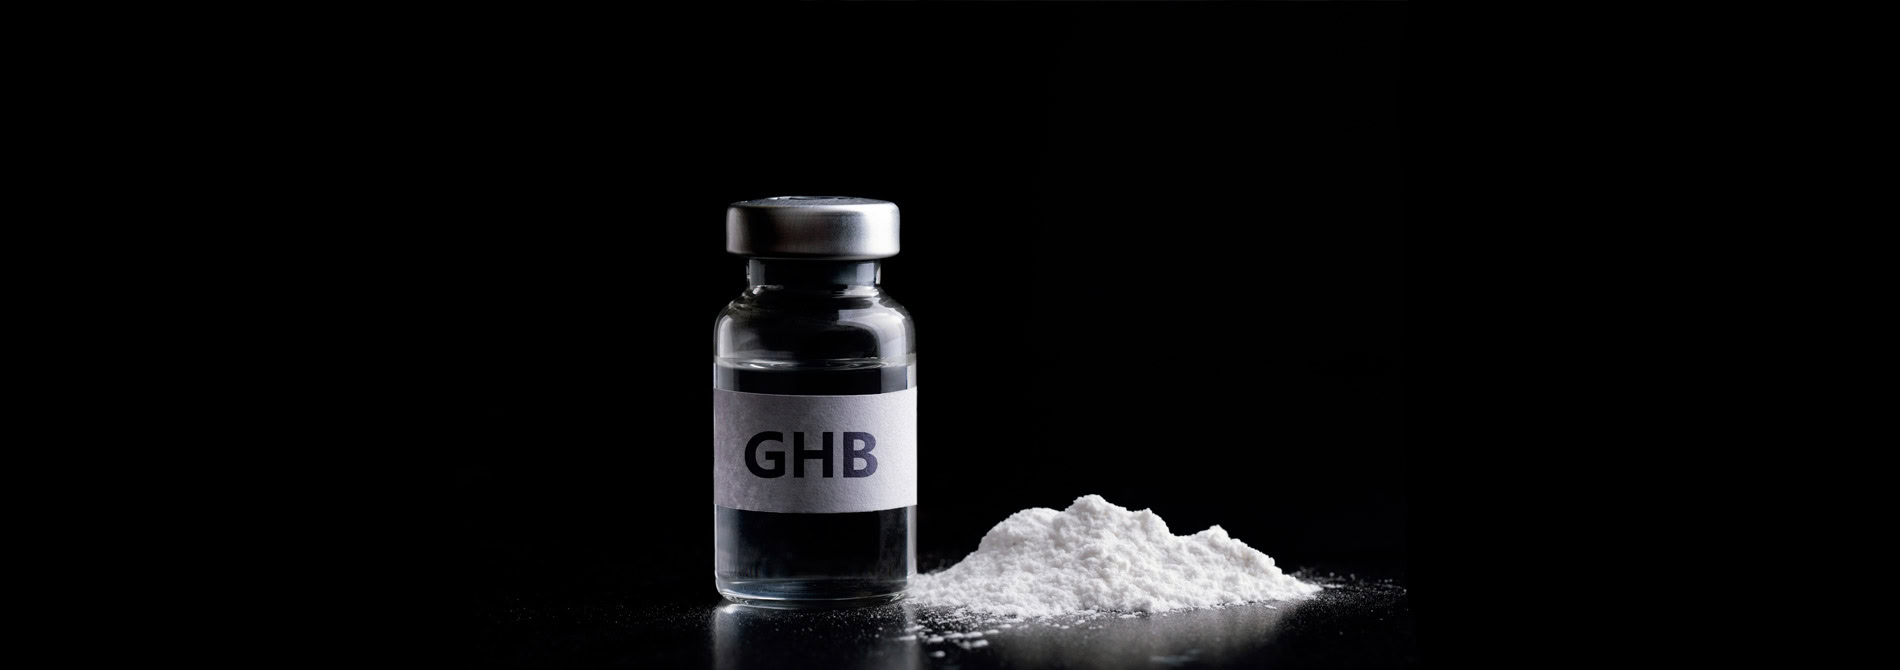 Bottle of GHB and powder form